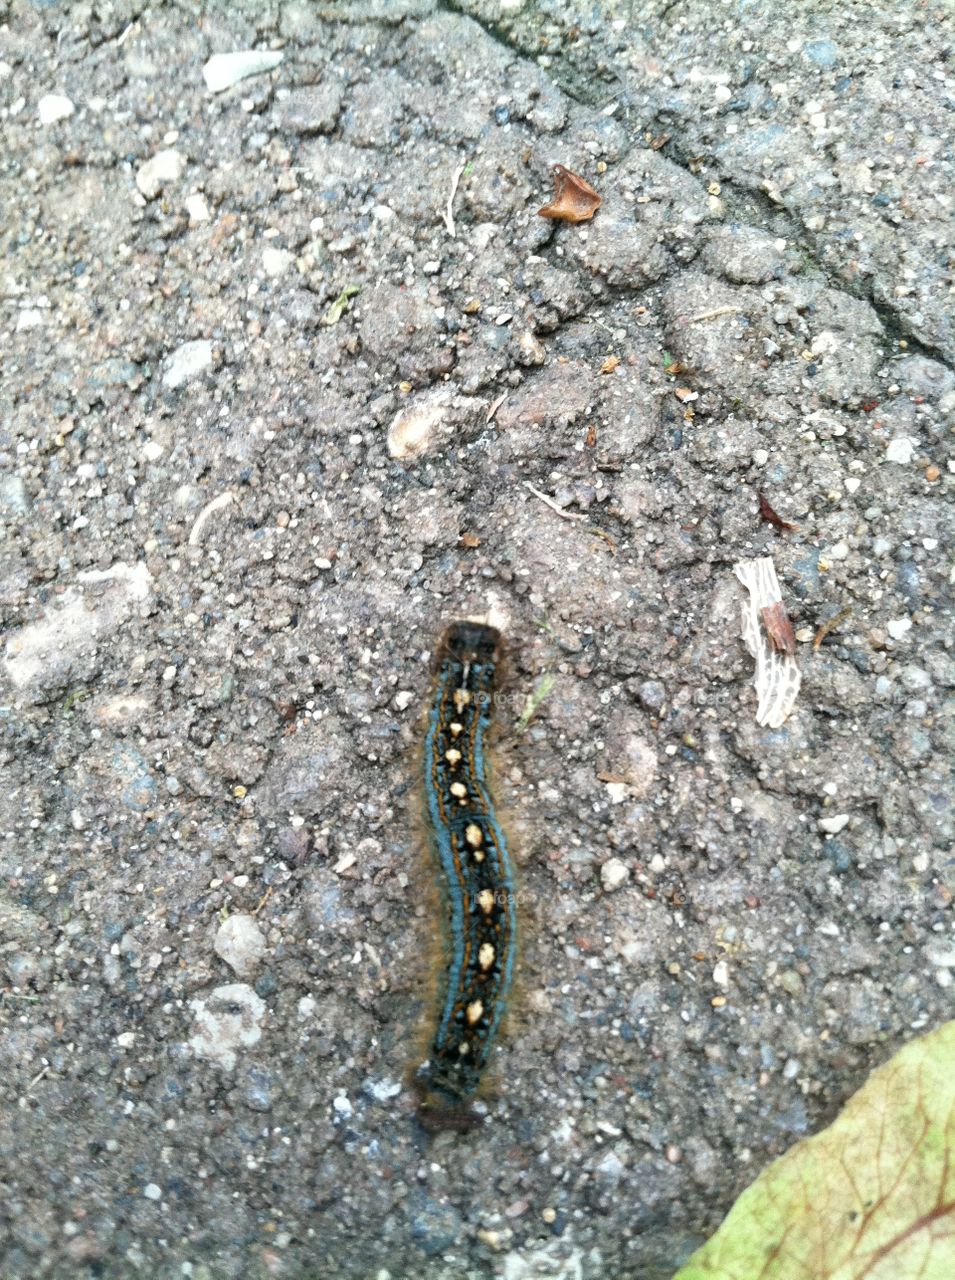 The long journey. Caterpillar making its way across the step